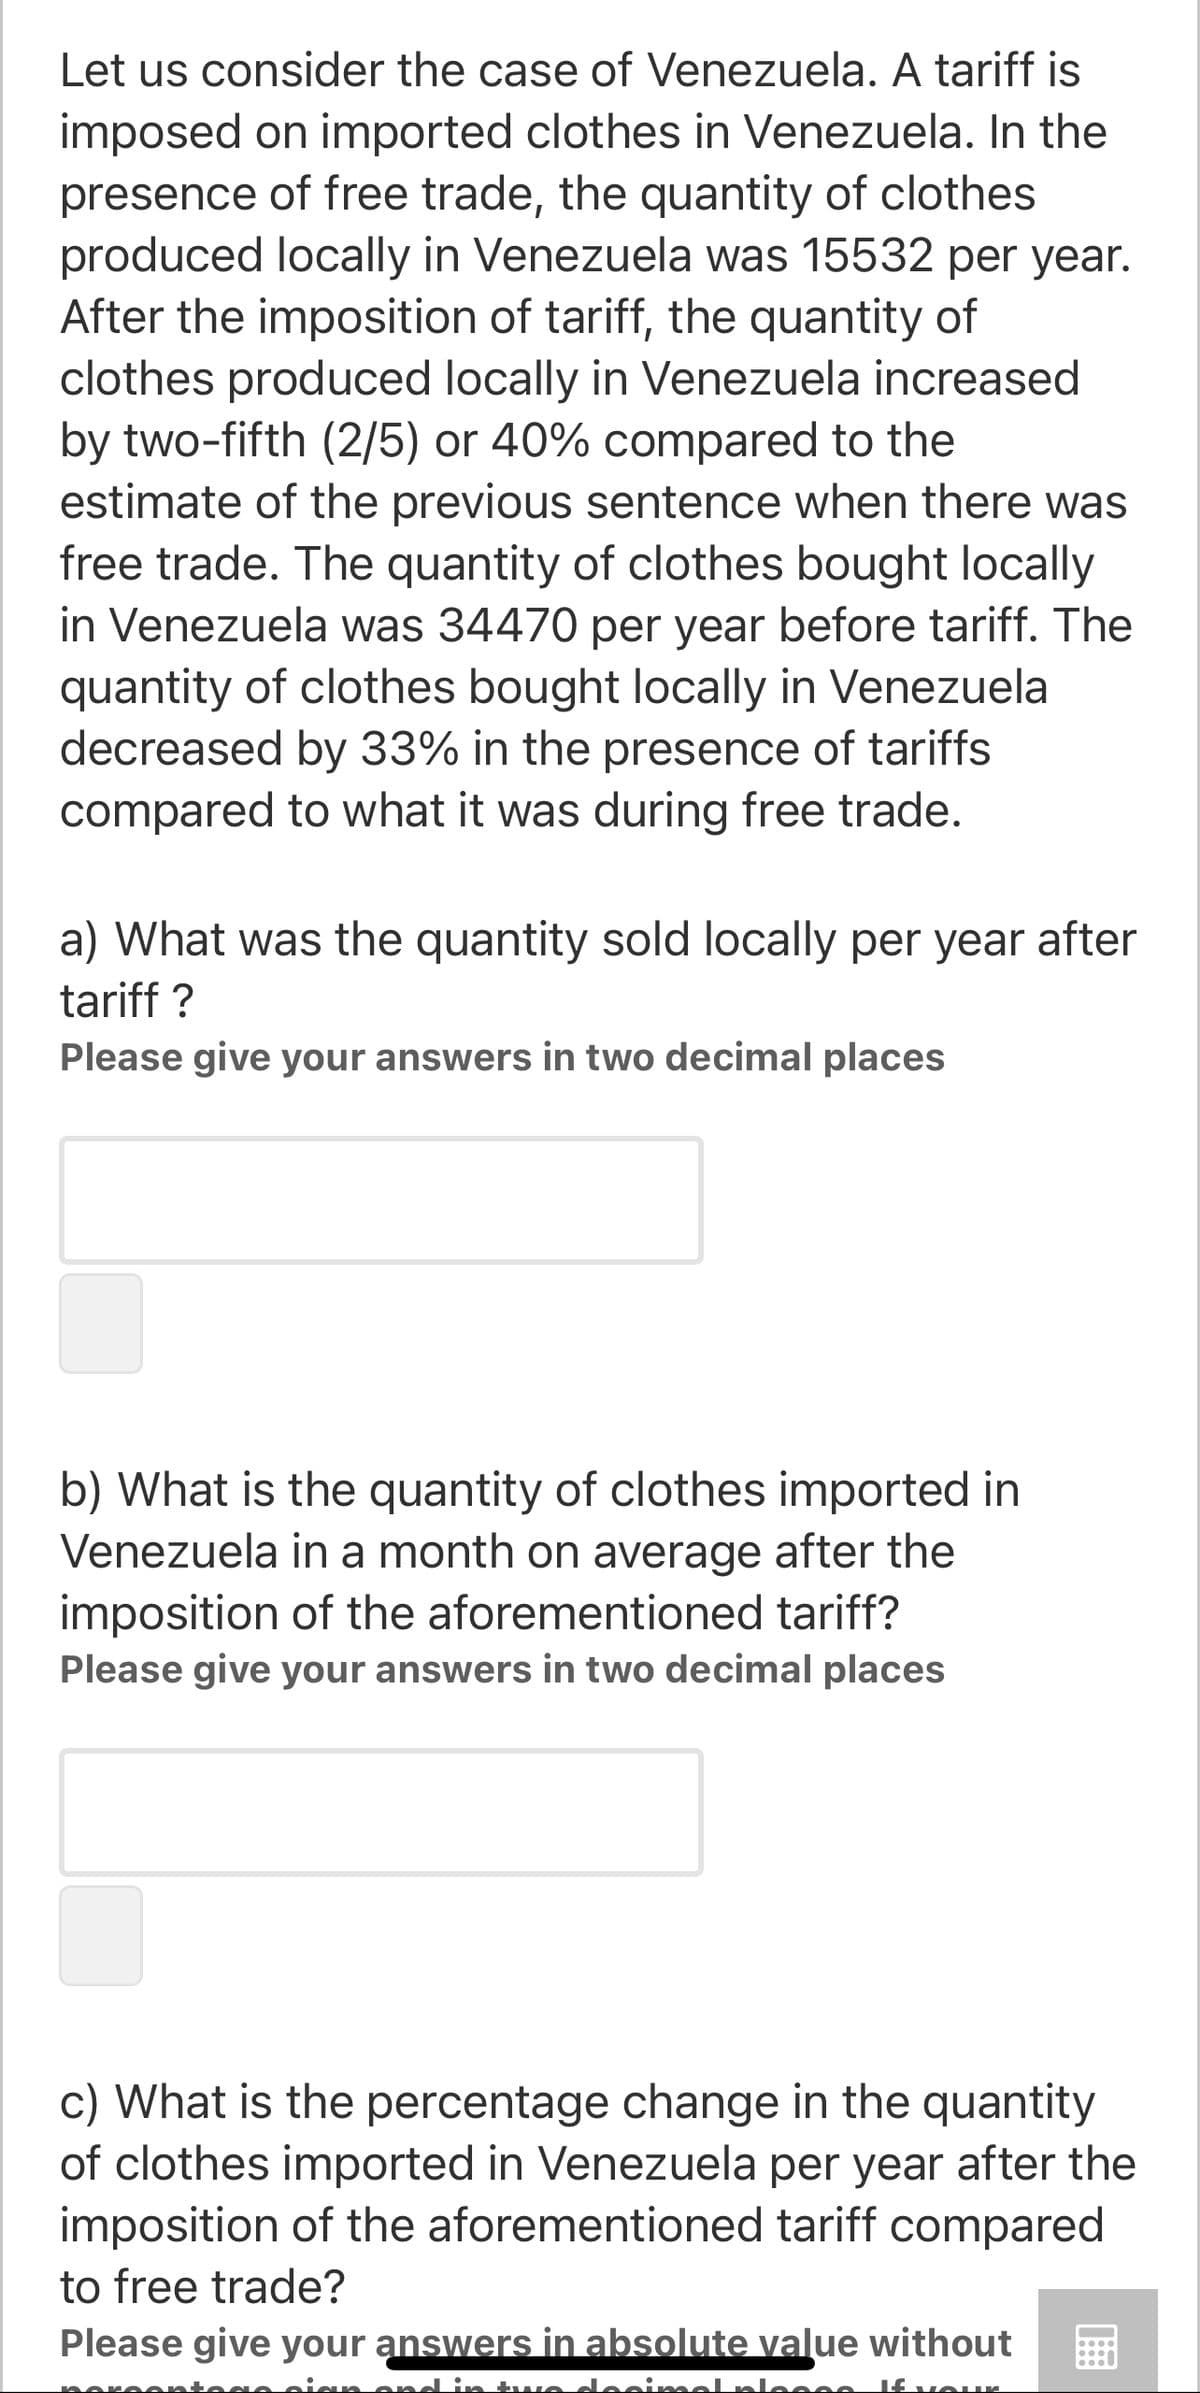 Let us consider the case of Venezuela. A tariff is
imposed on imported clothes in Venezuela. In the
presence of free trade, the quantity of clothes
produced locally in Venezuela was 15532 per year.
After the imposition of tariff, the quantity of
clothes produced locally in Venezuela increased
by two-fifth (2/5) or 40% compared to the
estimate of the previous sentence when there was
free trade. The quantity of clothes bought locally
in Venezuela was 34470 per year before tariff. The
quantity of clothes bought locally in Venezuela
decreased by 33% in the presence of tariffs
compared to what it was during free trade.
a) What was the quantity sold locally per year after
tariff ?
Please give your answers in two decimal places
b) What is the quantity of clothes imported in
Venezuela in a month on average after the
imposition of the aforementioned tariff?
Please give your answers in two decimal places
c) What is the percentage change in the quantity
of clothes imported in Venezuela per year after the
imposition of the aforementioned tariff compared
to free trade?
Please give your answers in absolute value without
twe doei
